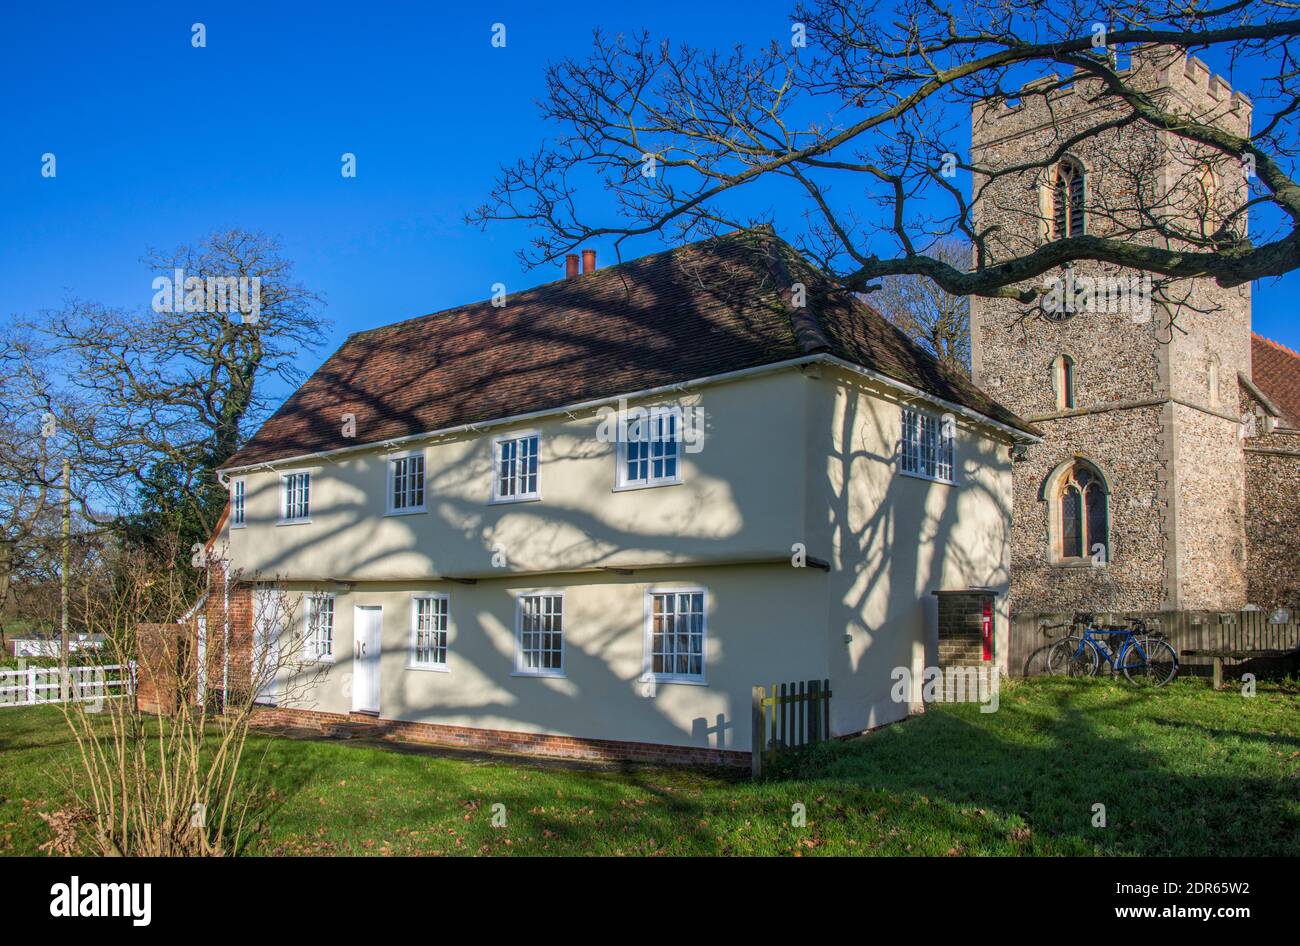 Picturesque 15th century Marriage feasting hall and clock tower Saint Mary's Church, Matching Church Village Essex England Stock Photo